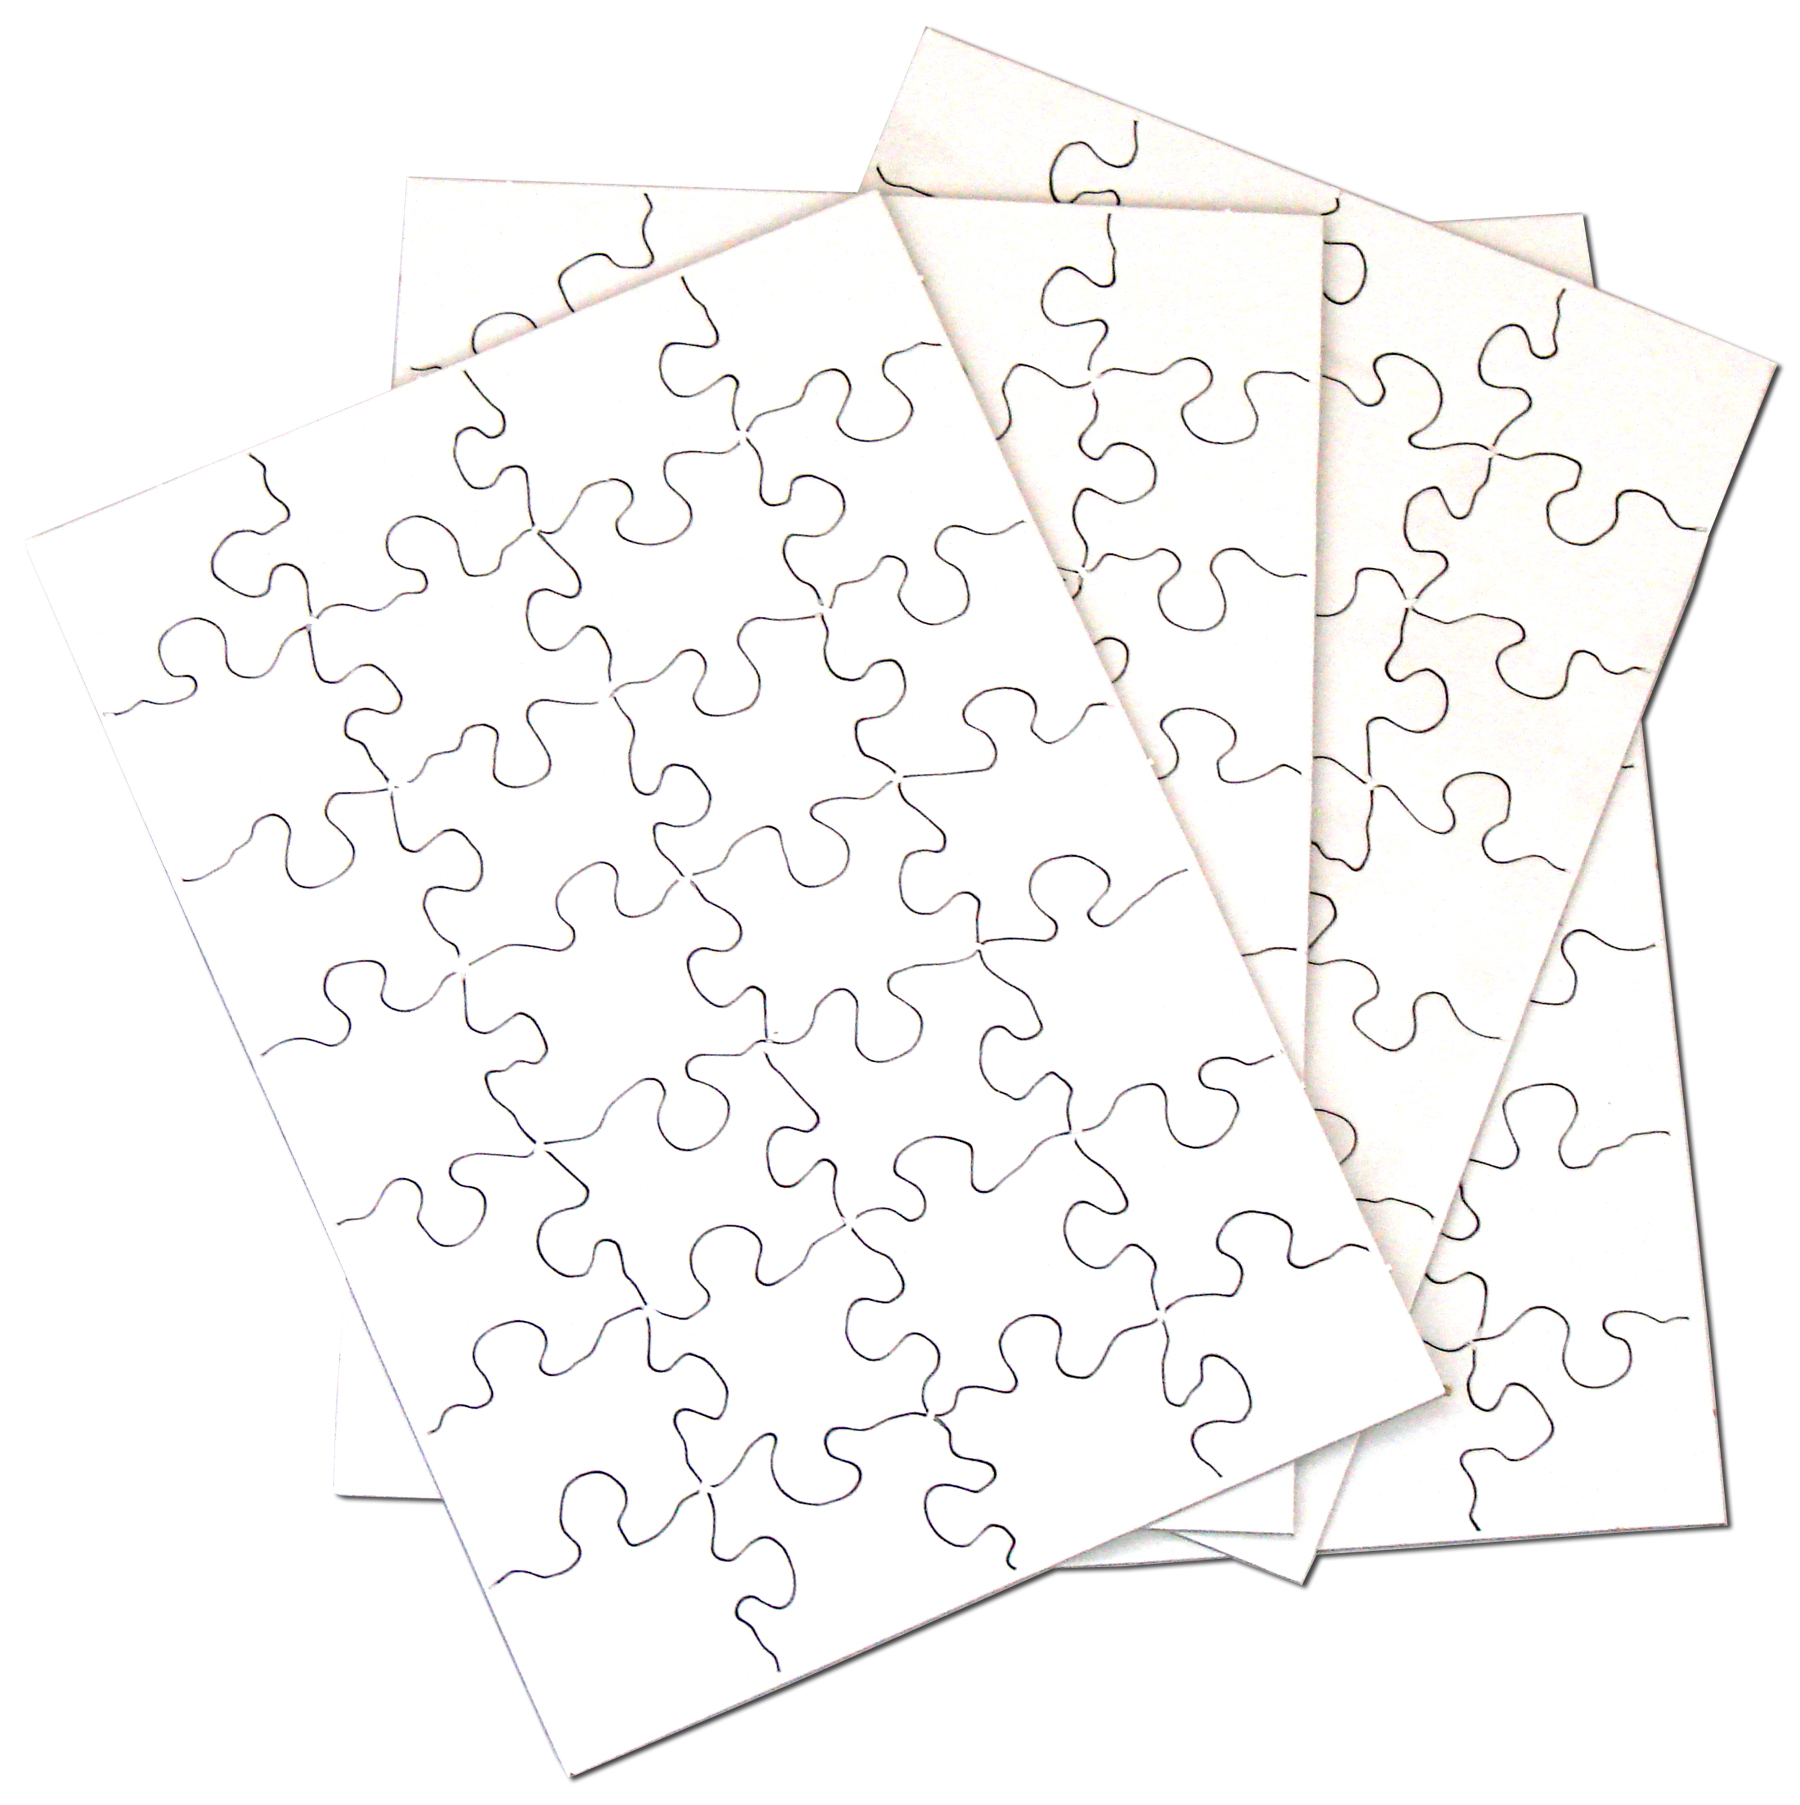 INOVART Puzzle-It 63-Piece Blank Puzzle, 12 Puzzles Per Package, 8-1/2 x  11, White